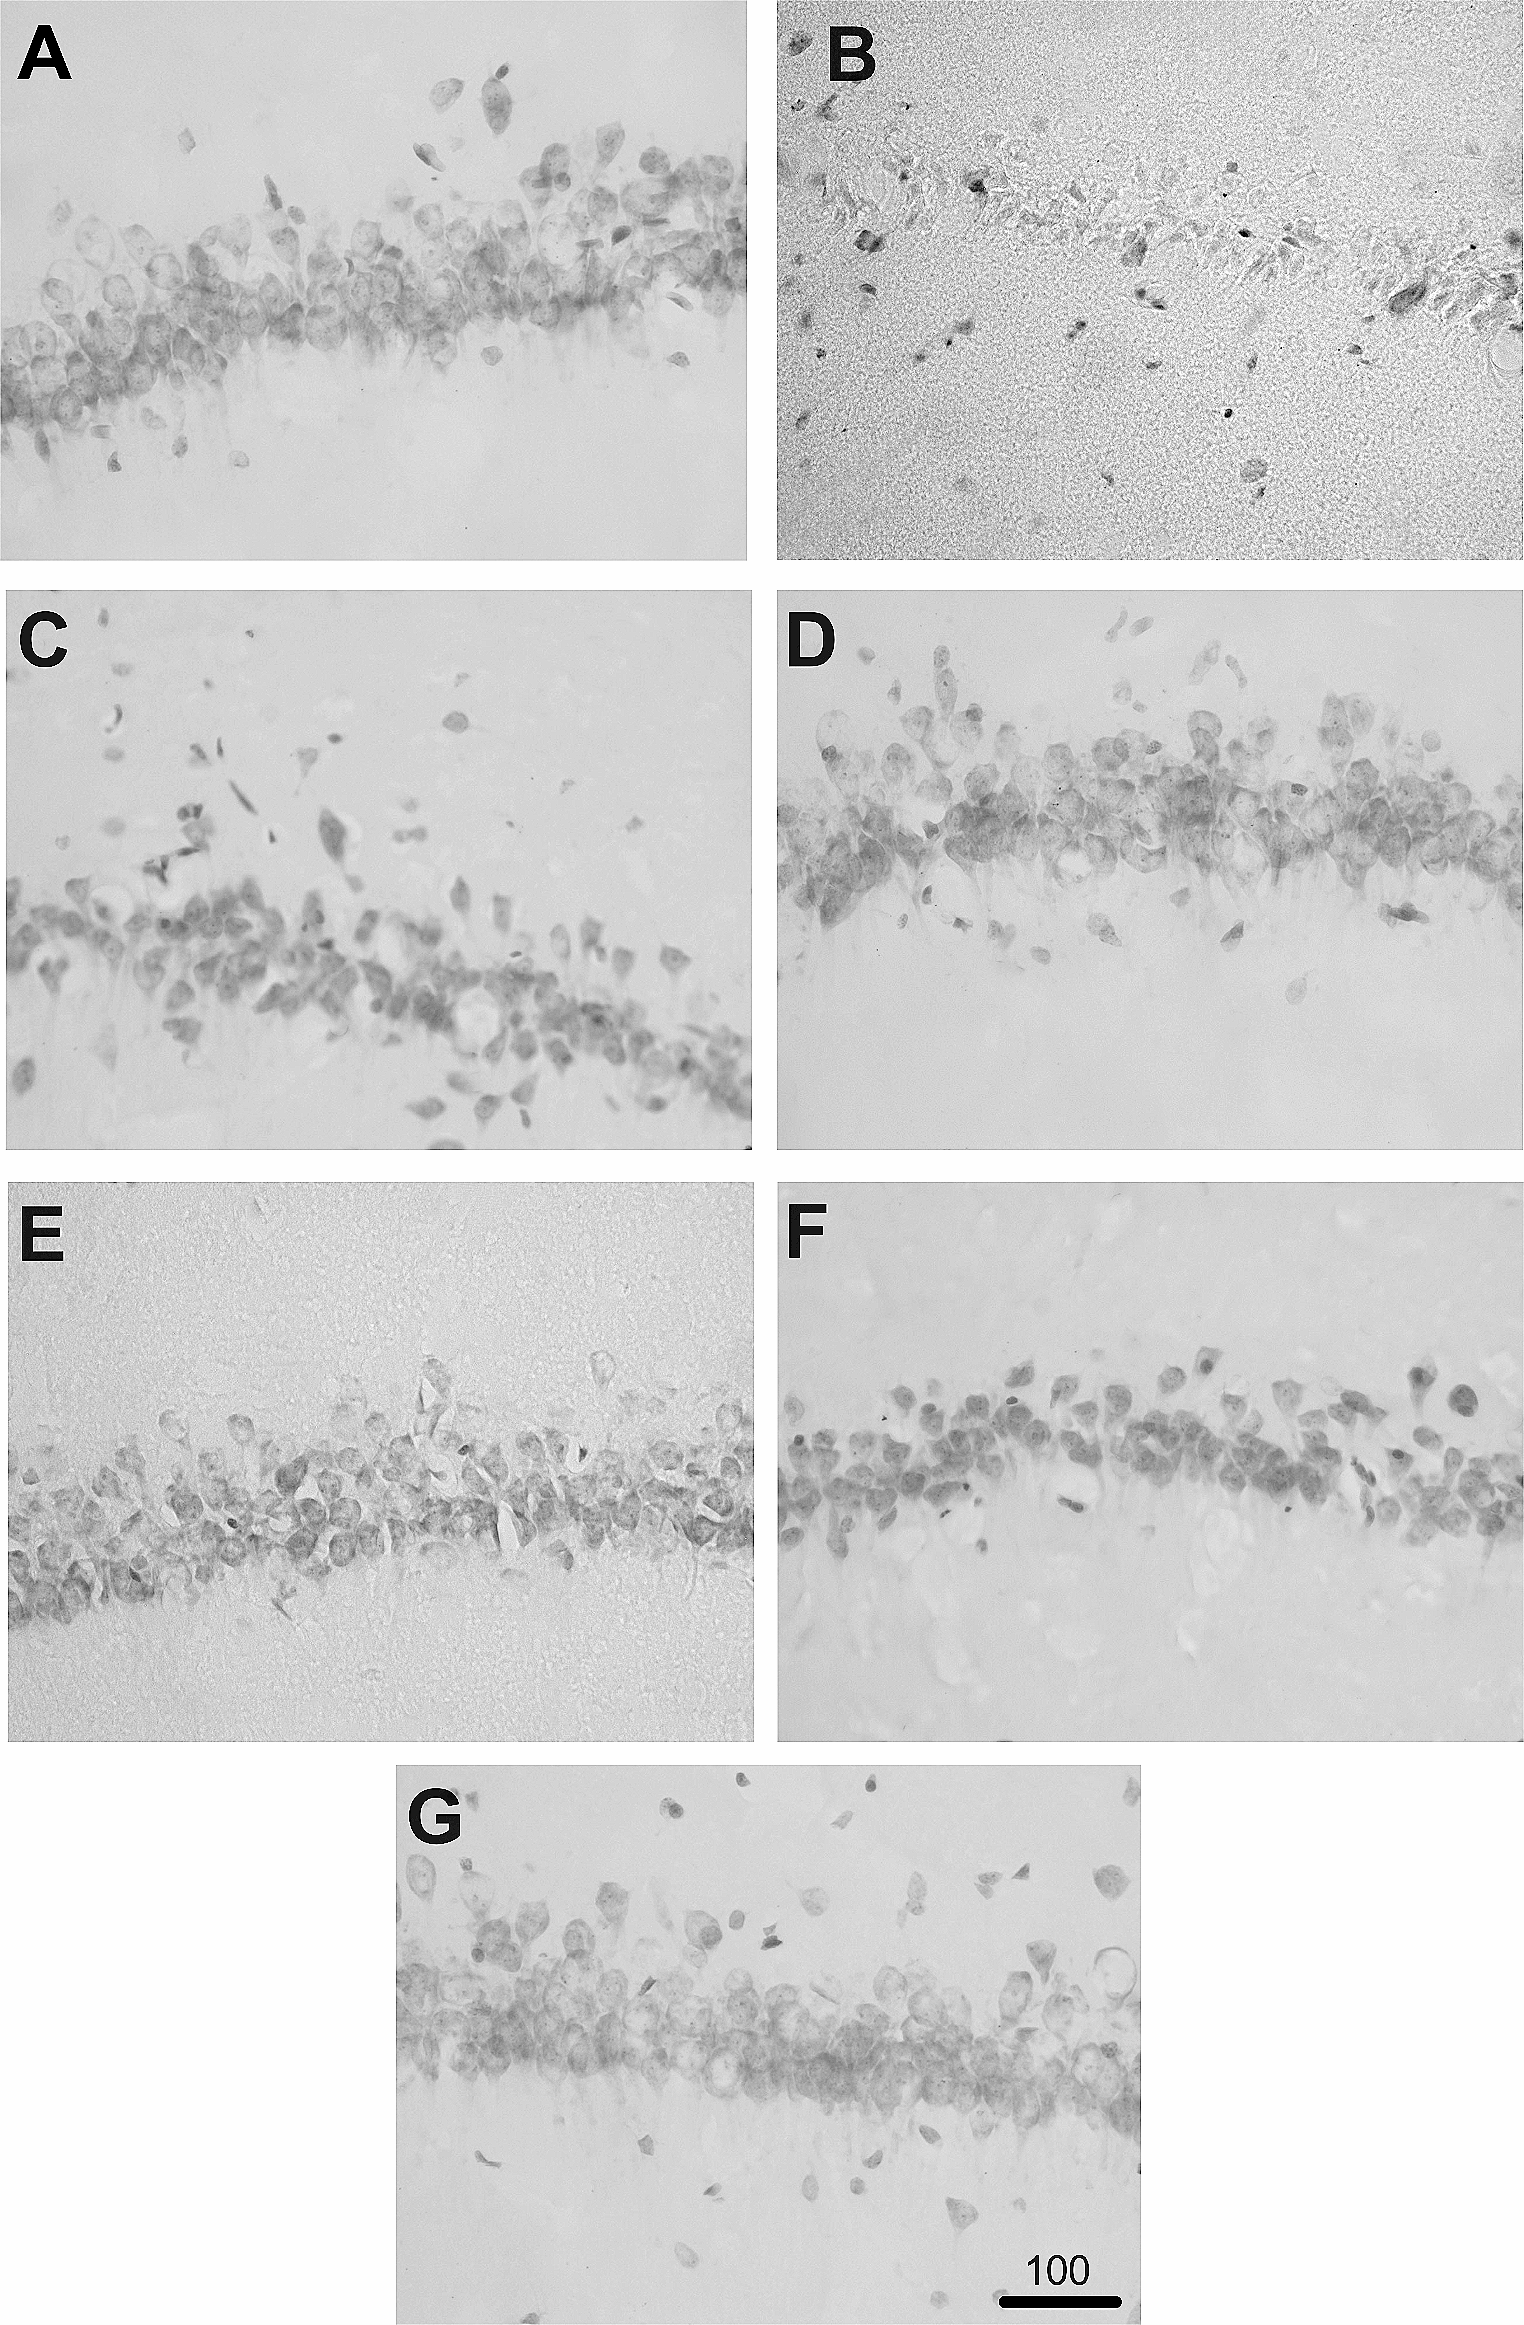 Synergistic neuroprotective action of prolactin and 17β-estradiol on kainic acid-induced hippocampal injury and long-term memory deficit in ovariectomized rats